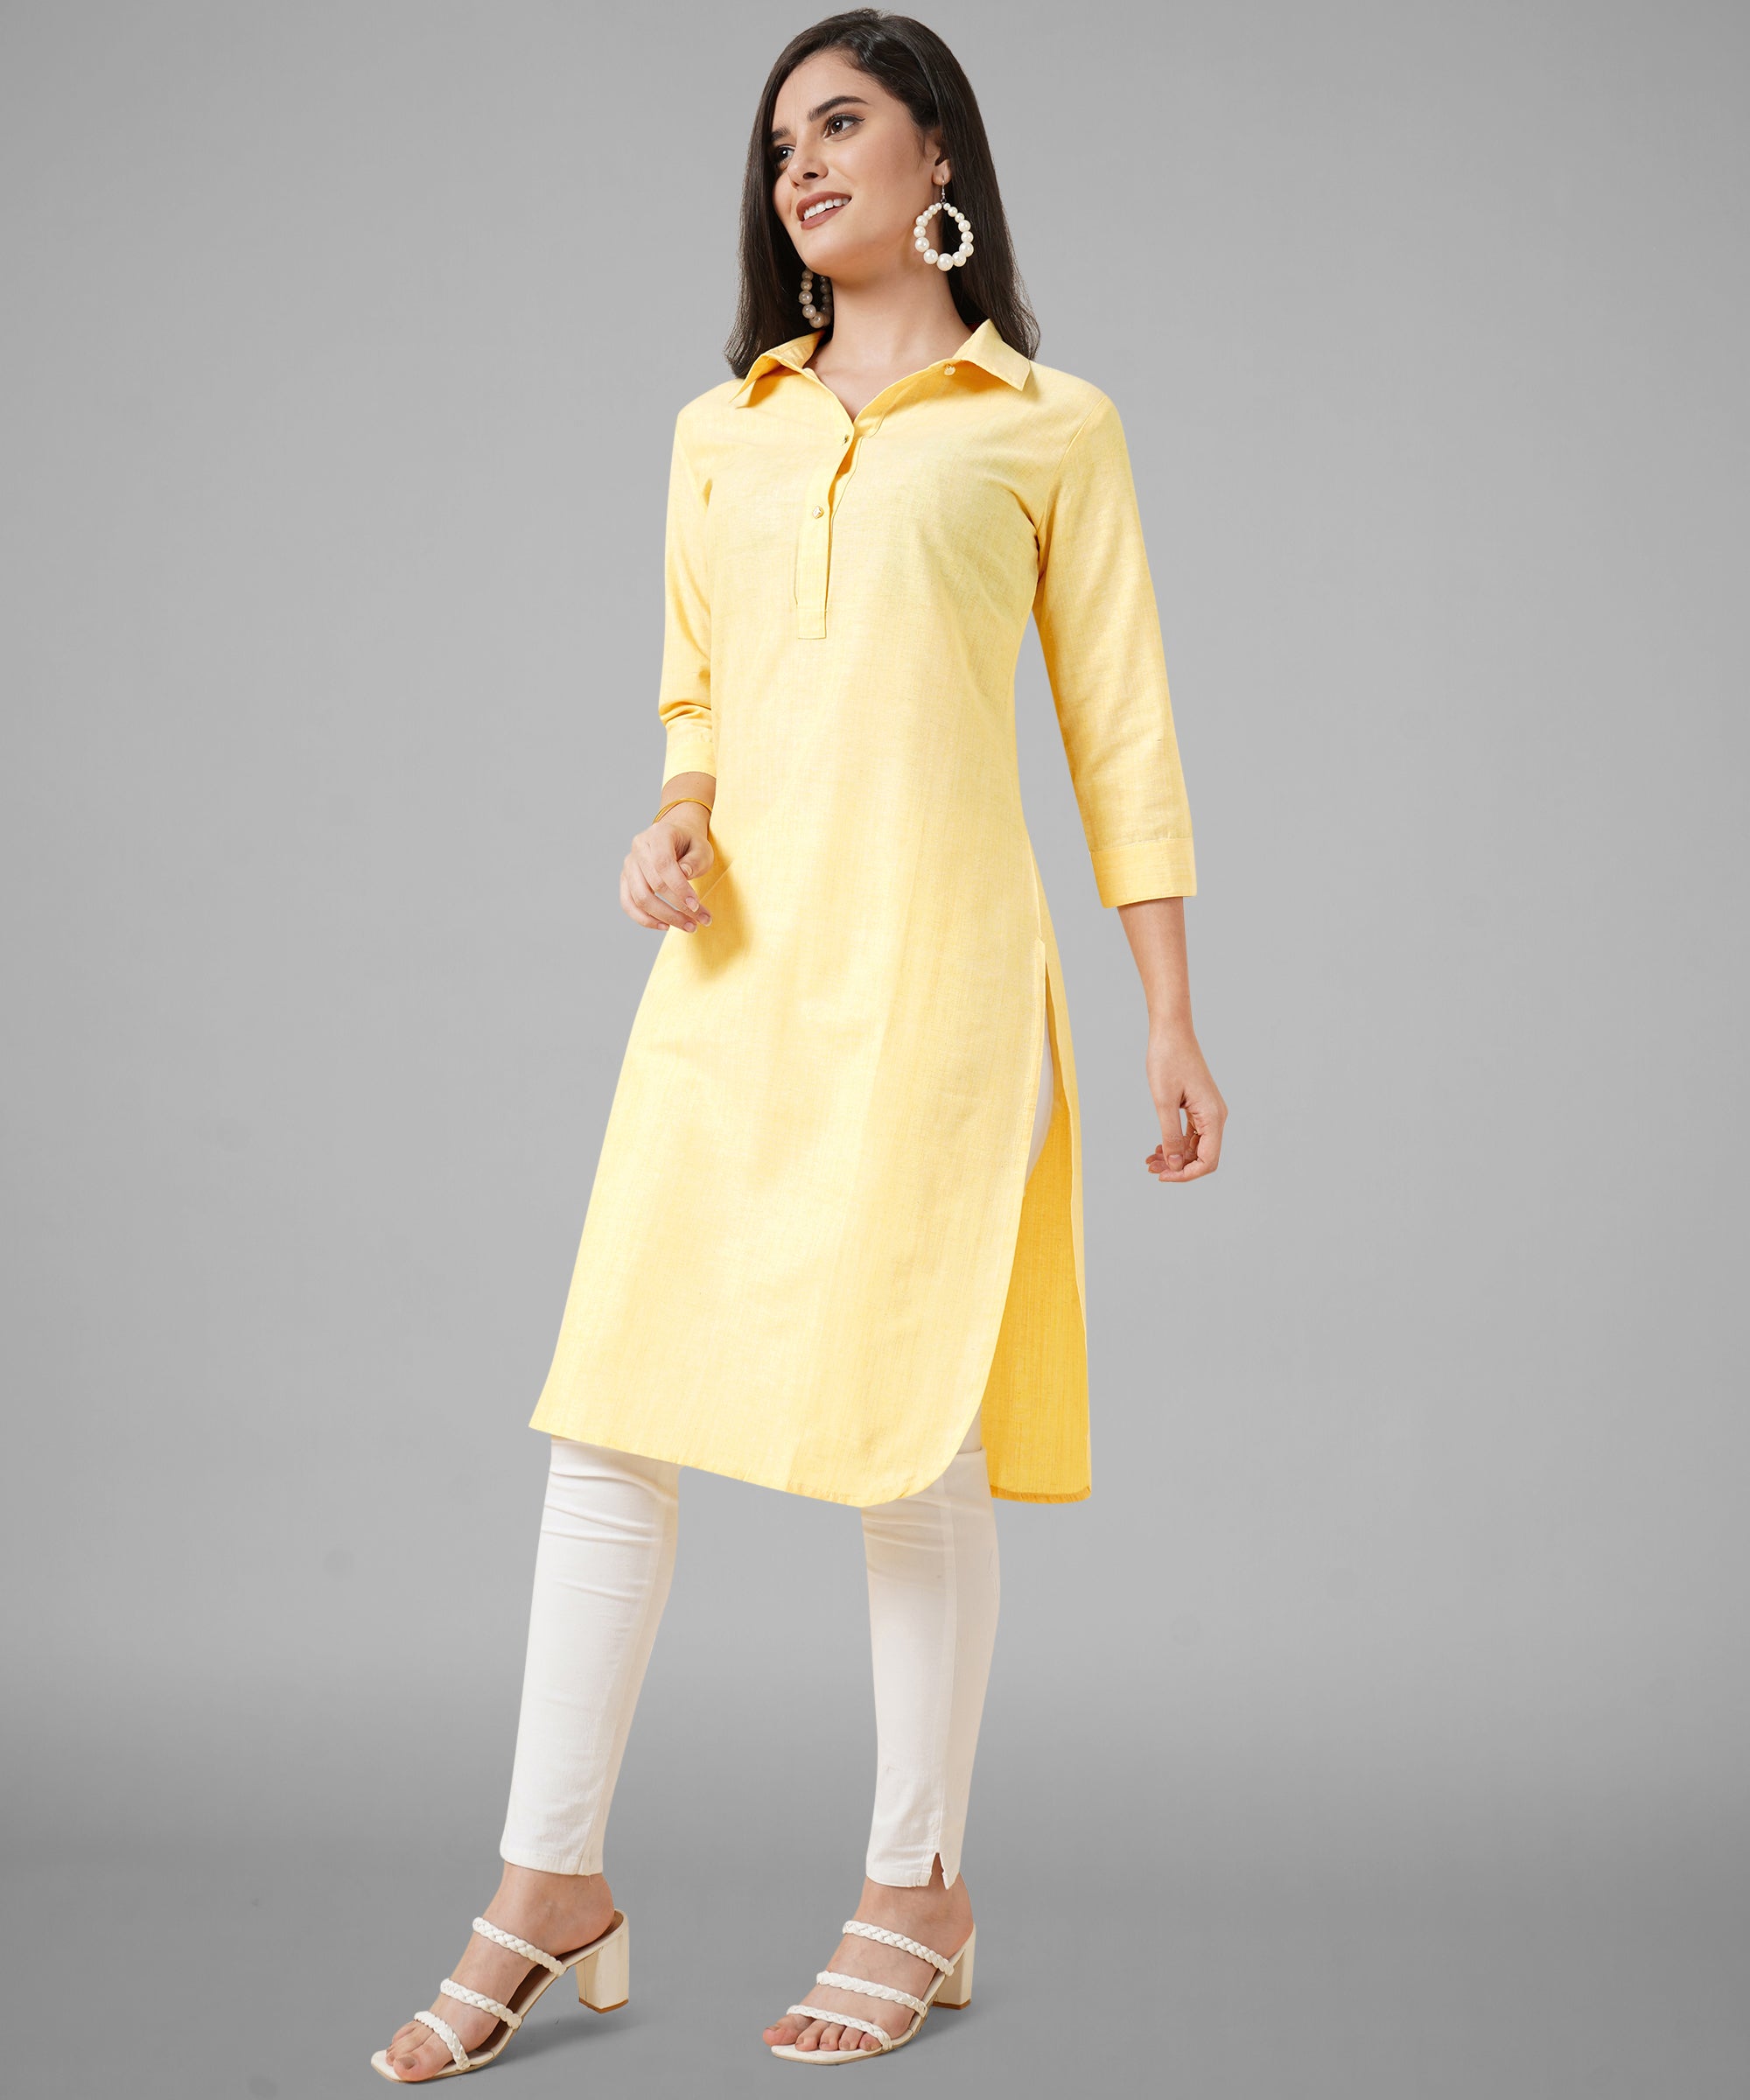 Stylish and Unique High Neck Kurti/Suit Design | Stylish and Unique High  Neck Kurti/Suit Design Best Online Tailoring Services at your doorstep.  ✂️🧵👗💯🎗✓♨️💲🔺🔻🇵🇰 Get Special Discount on your first... | By Smart